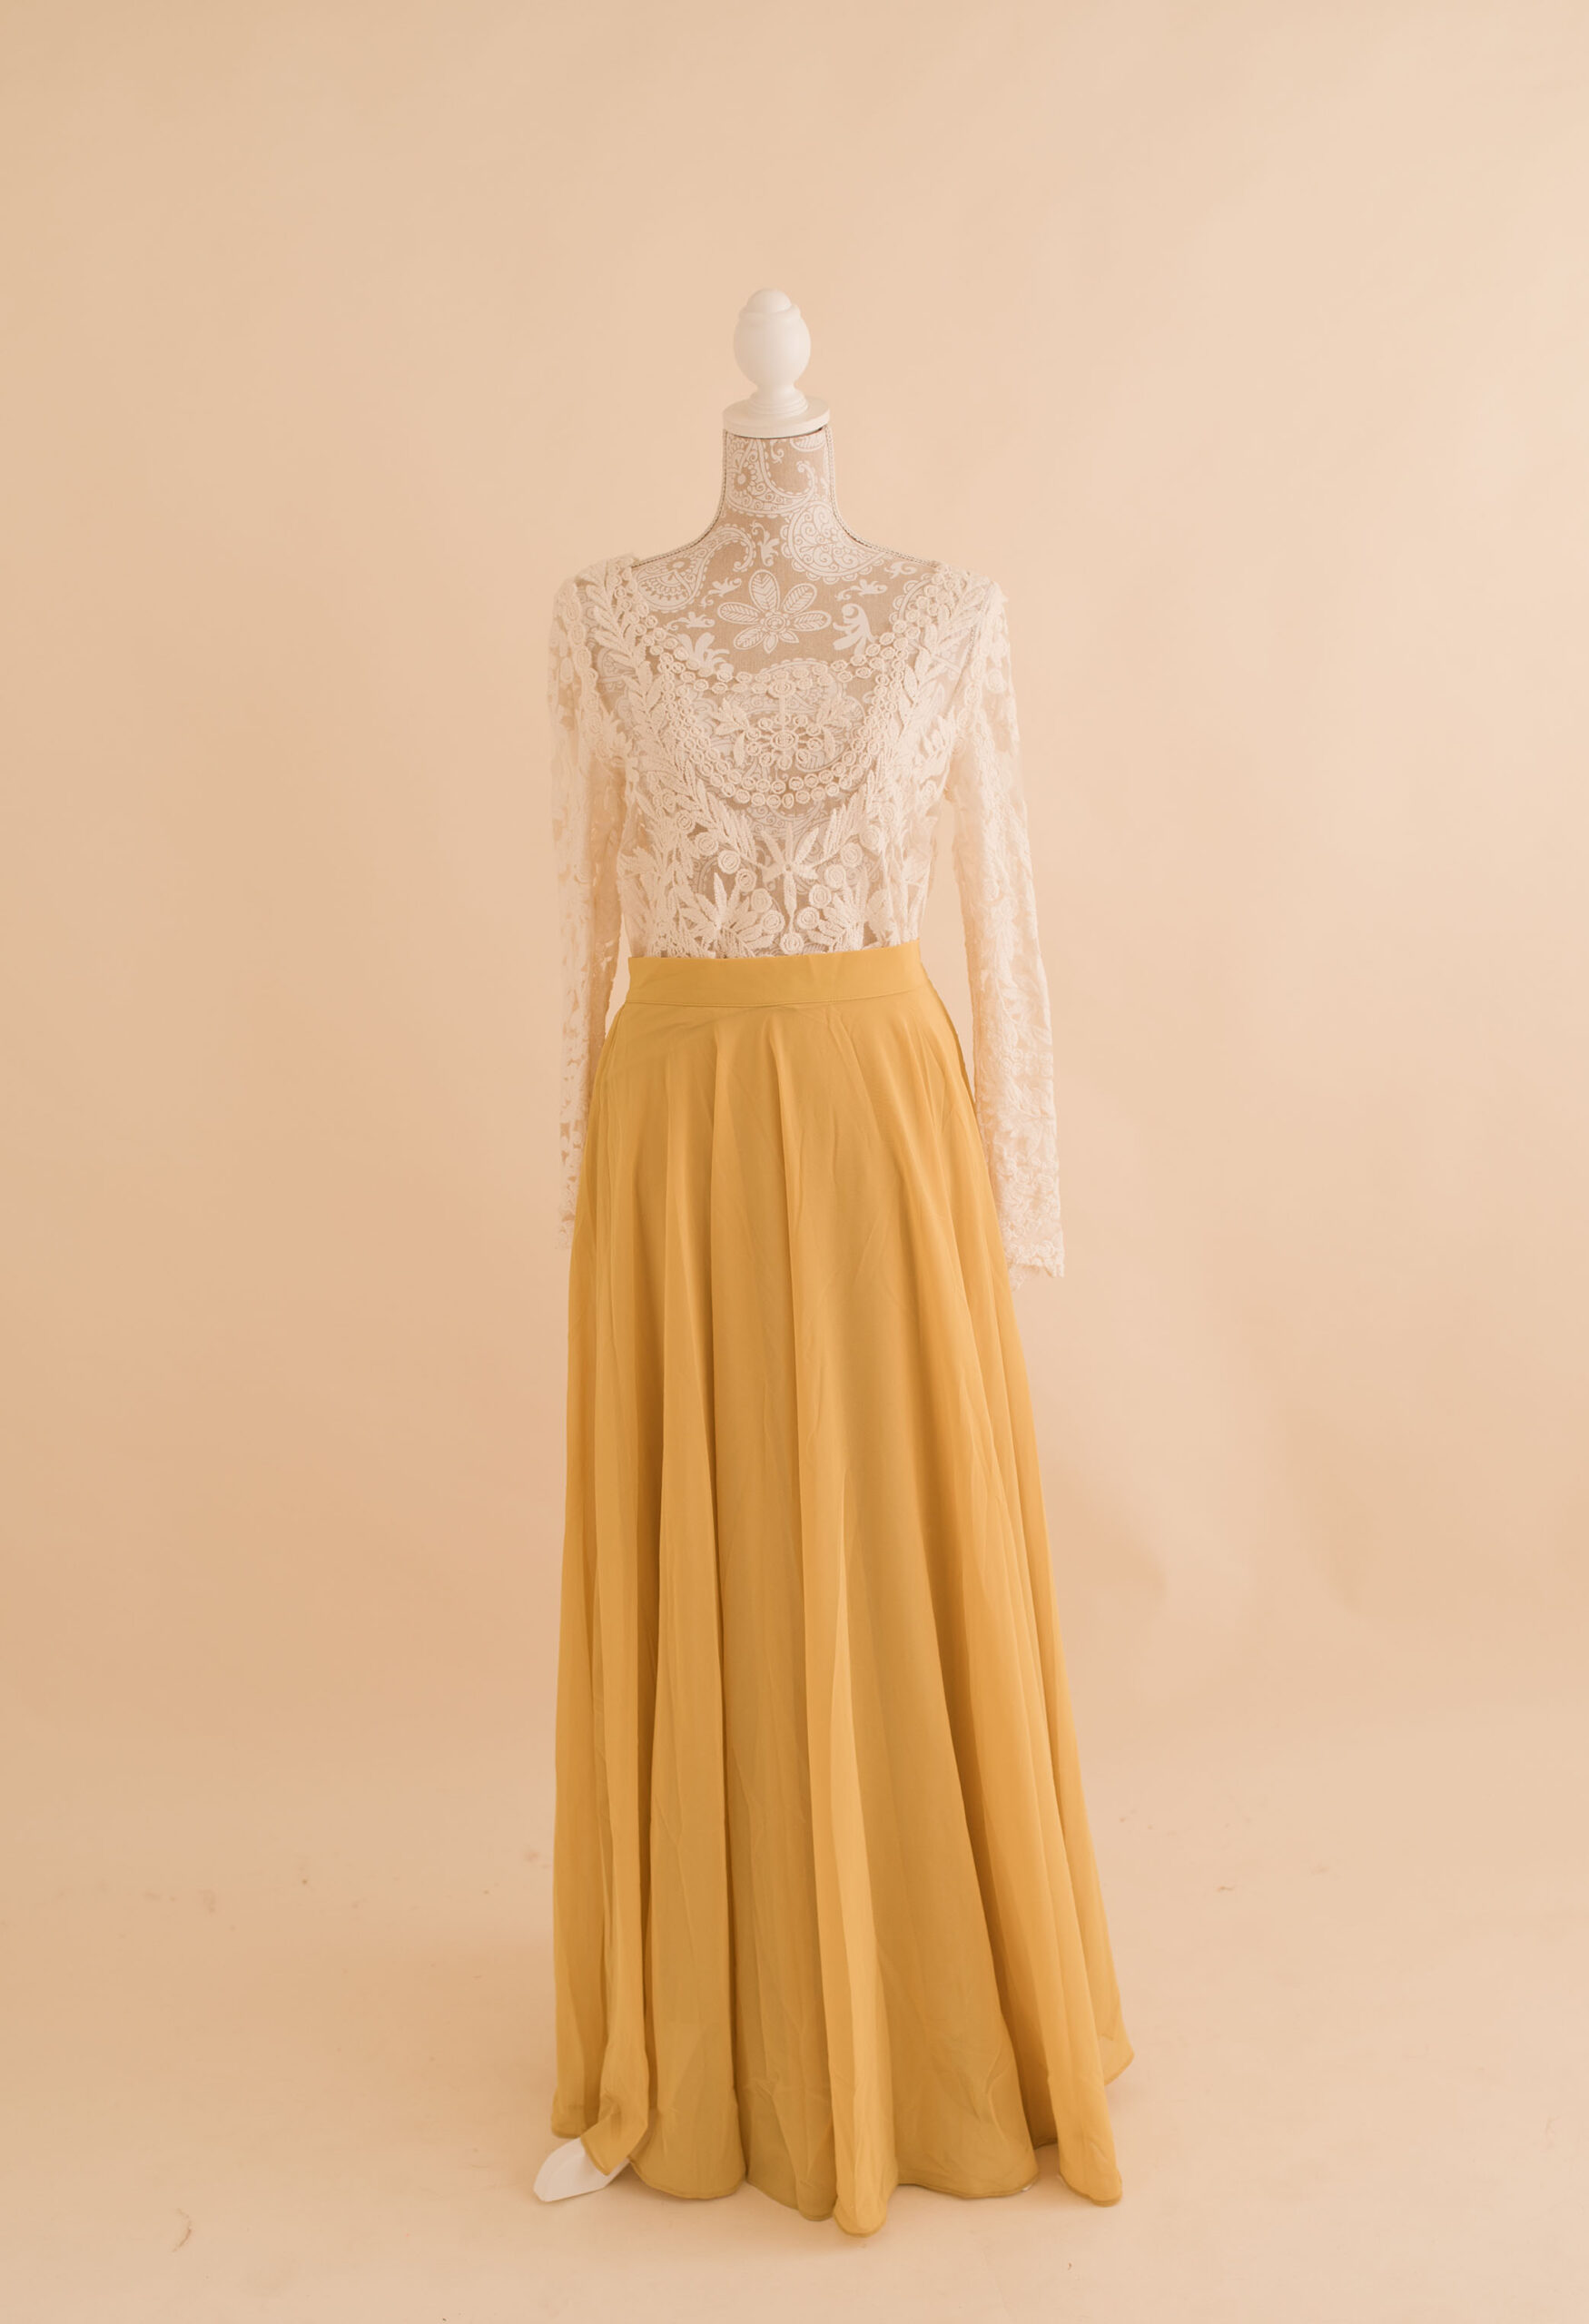 White lace top and yellow maxi skirt available in studio wardrobe 